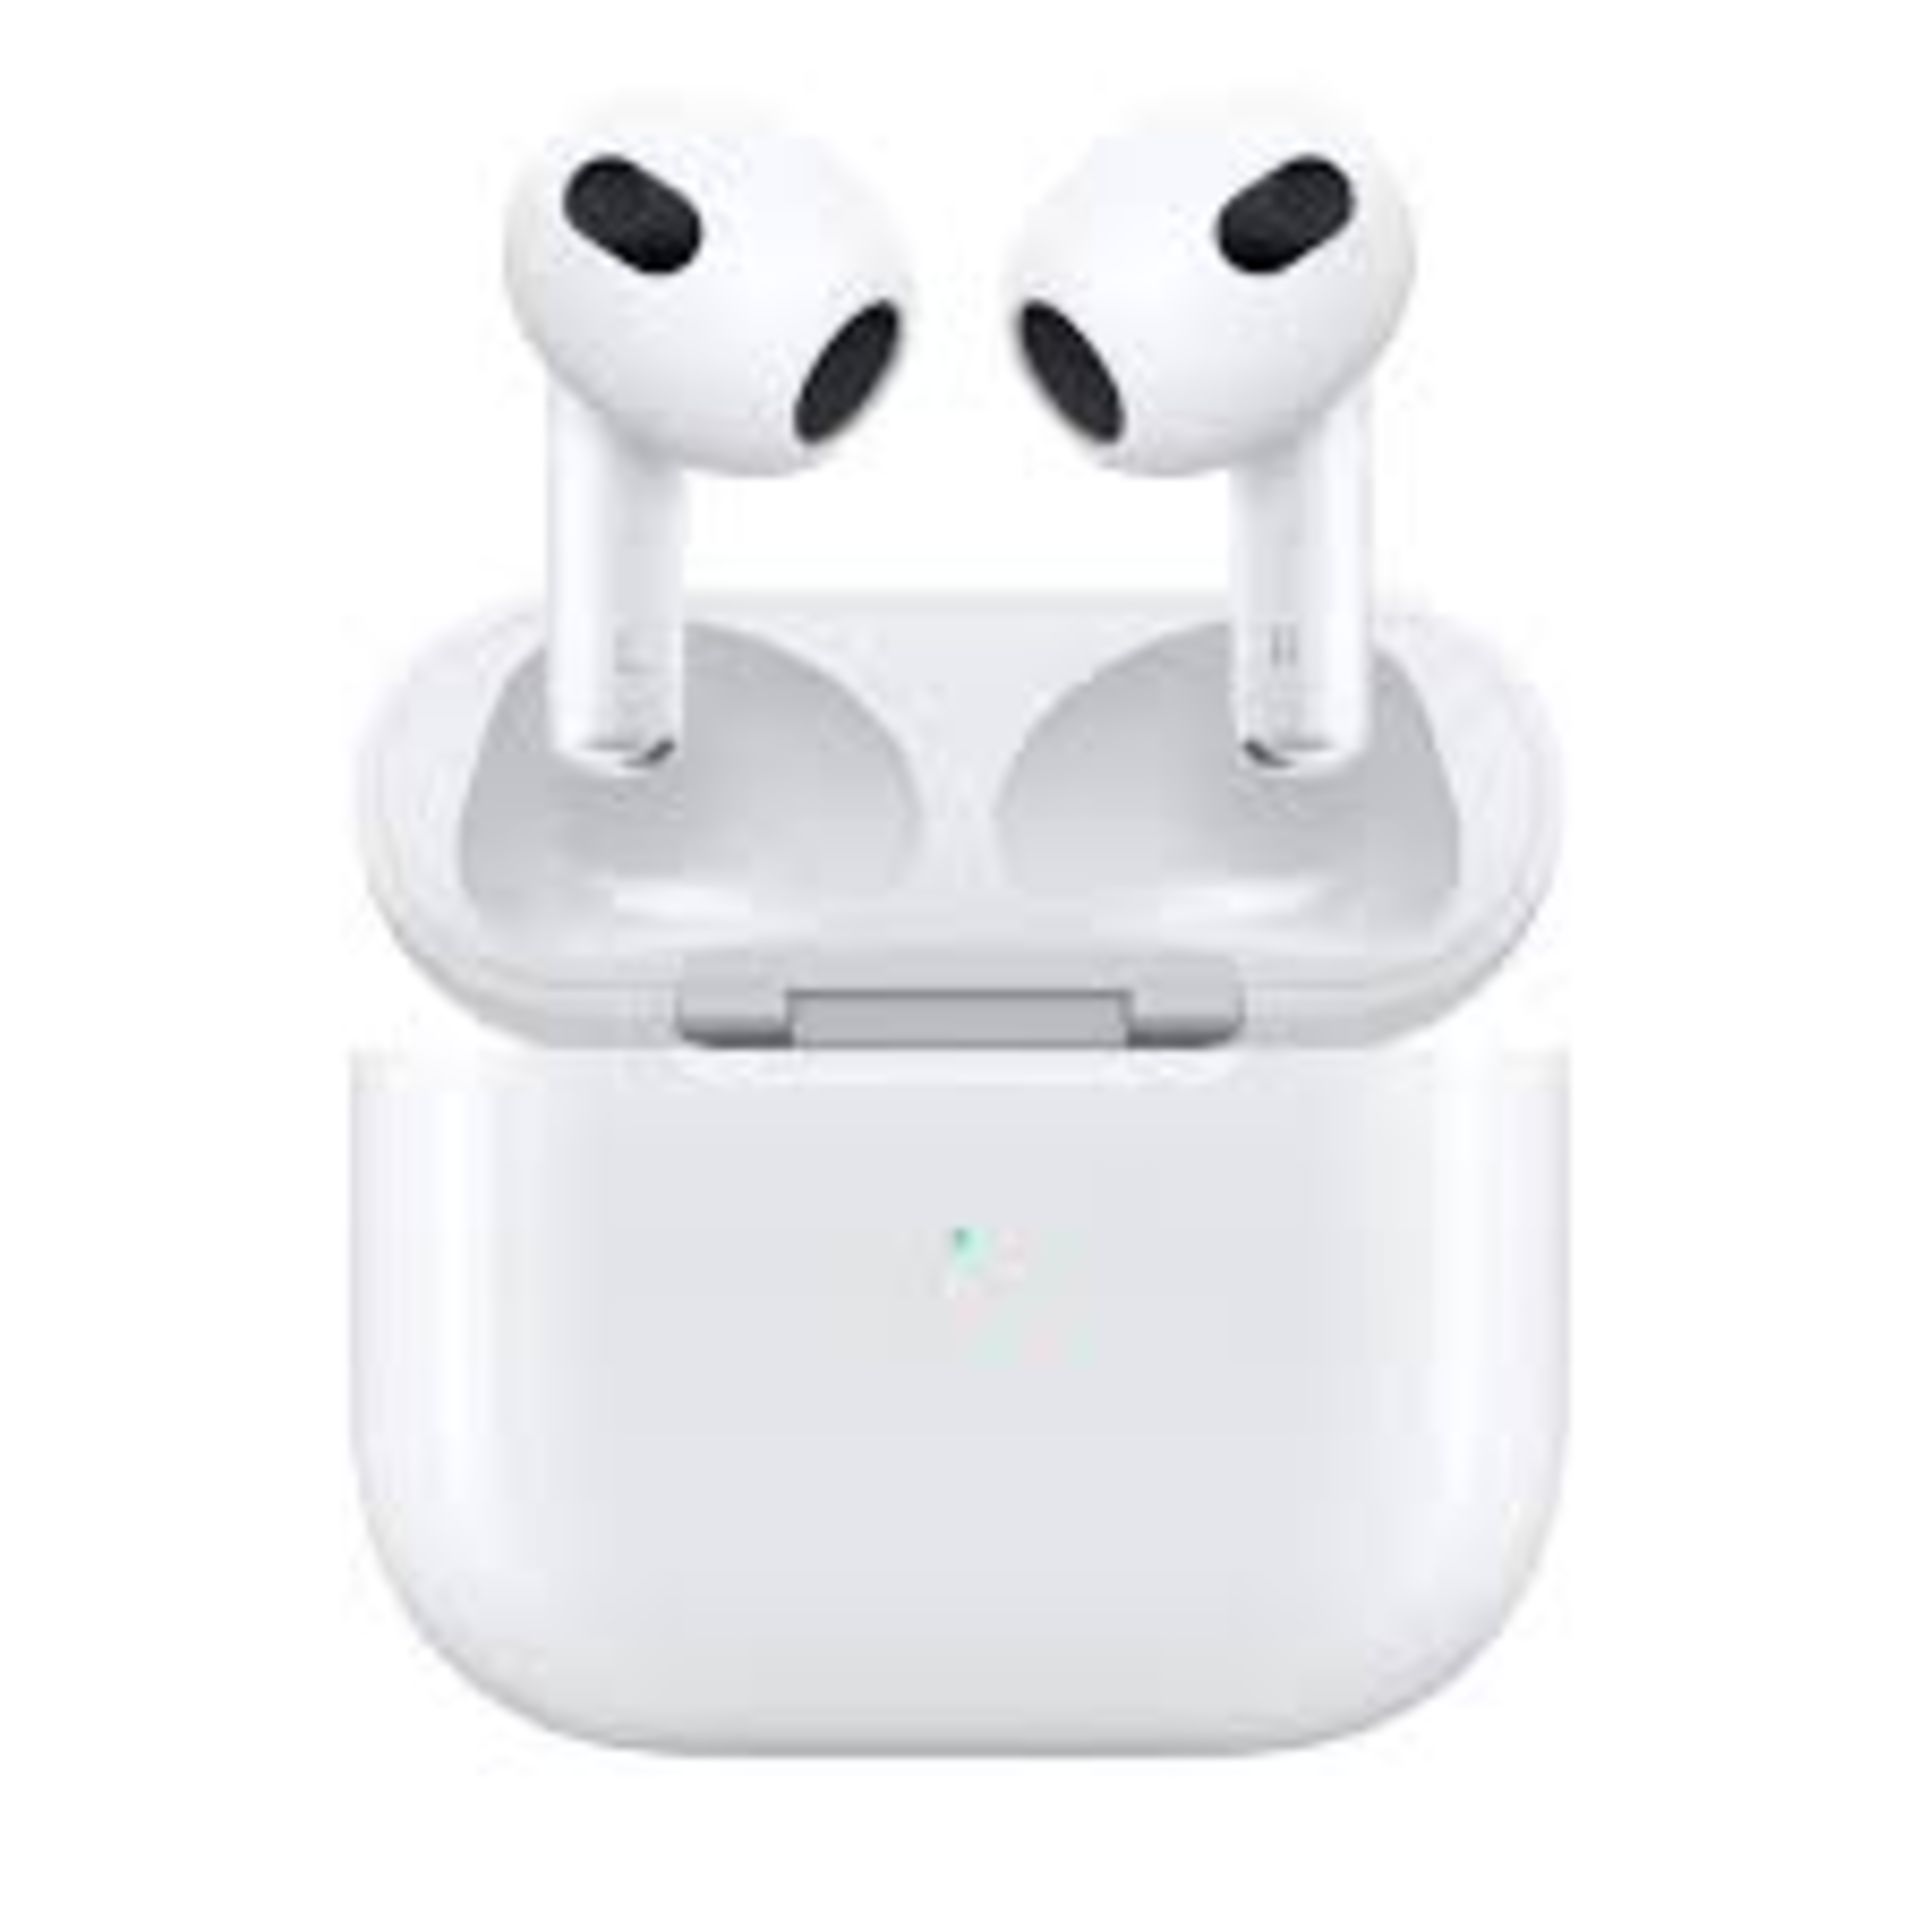 Apple Airpods - PCK4